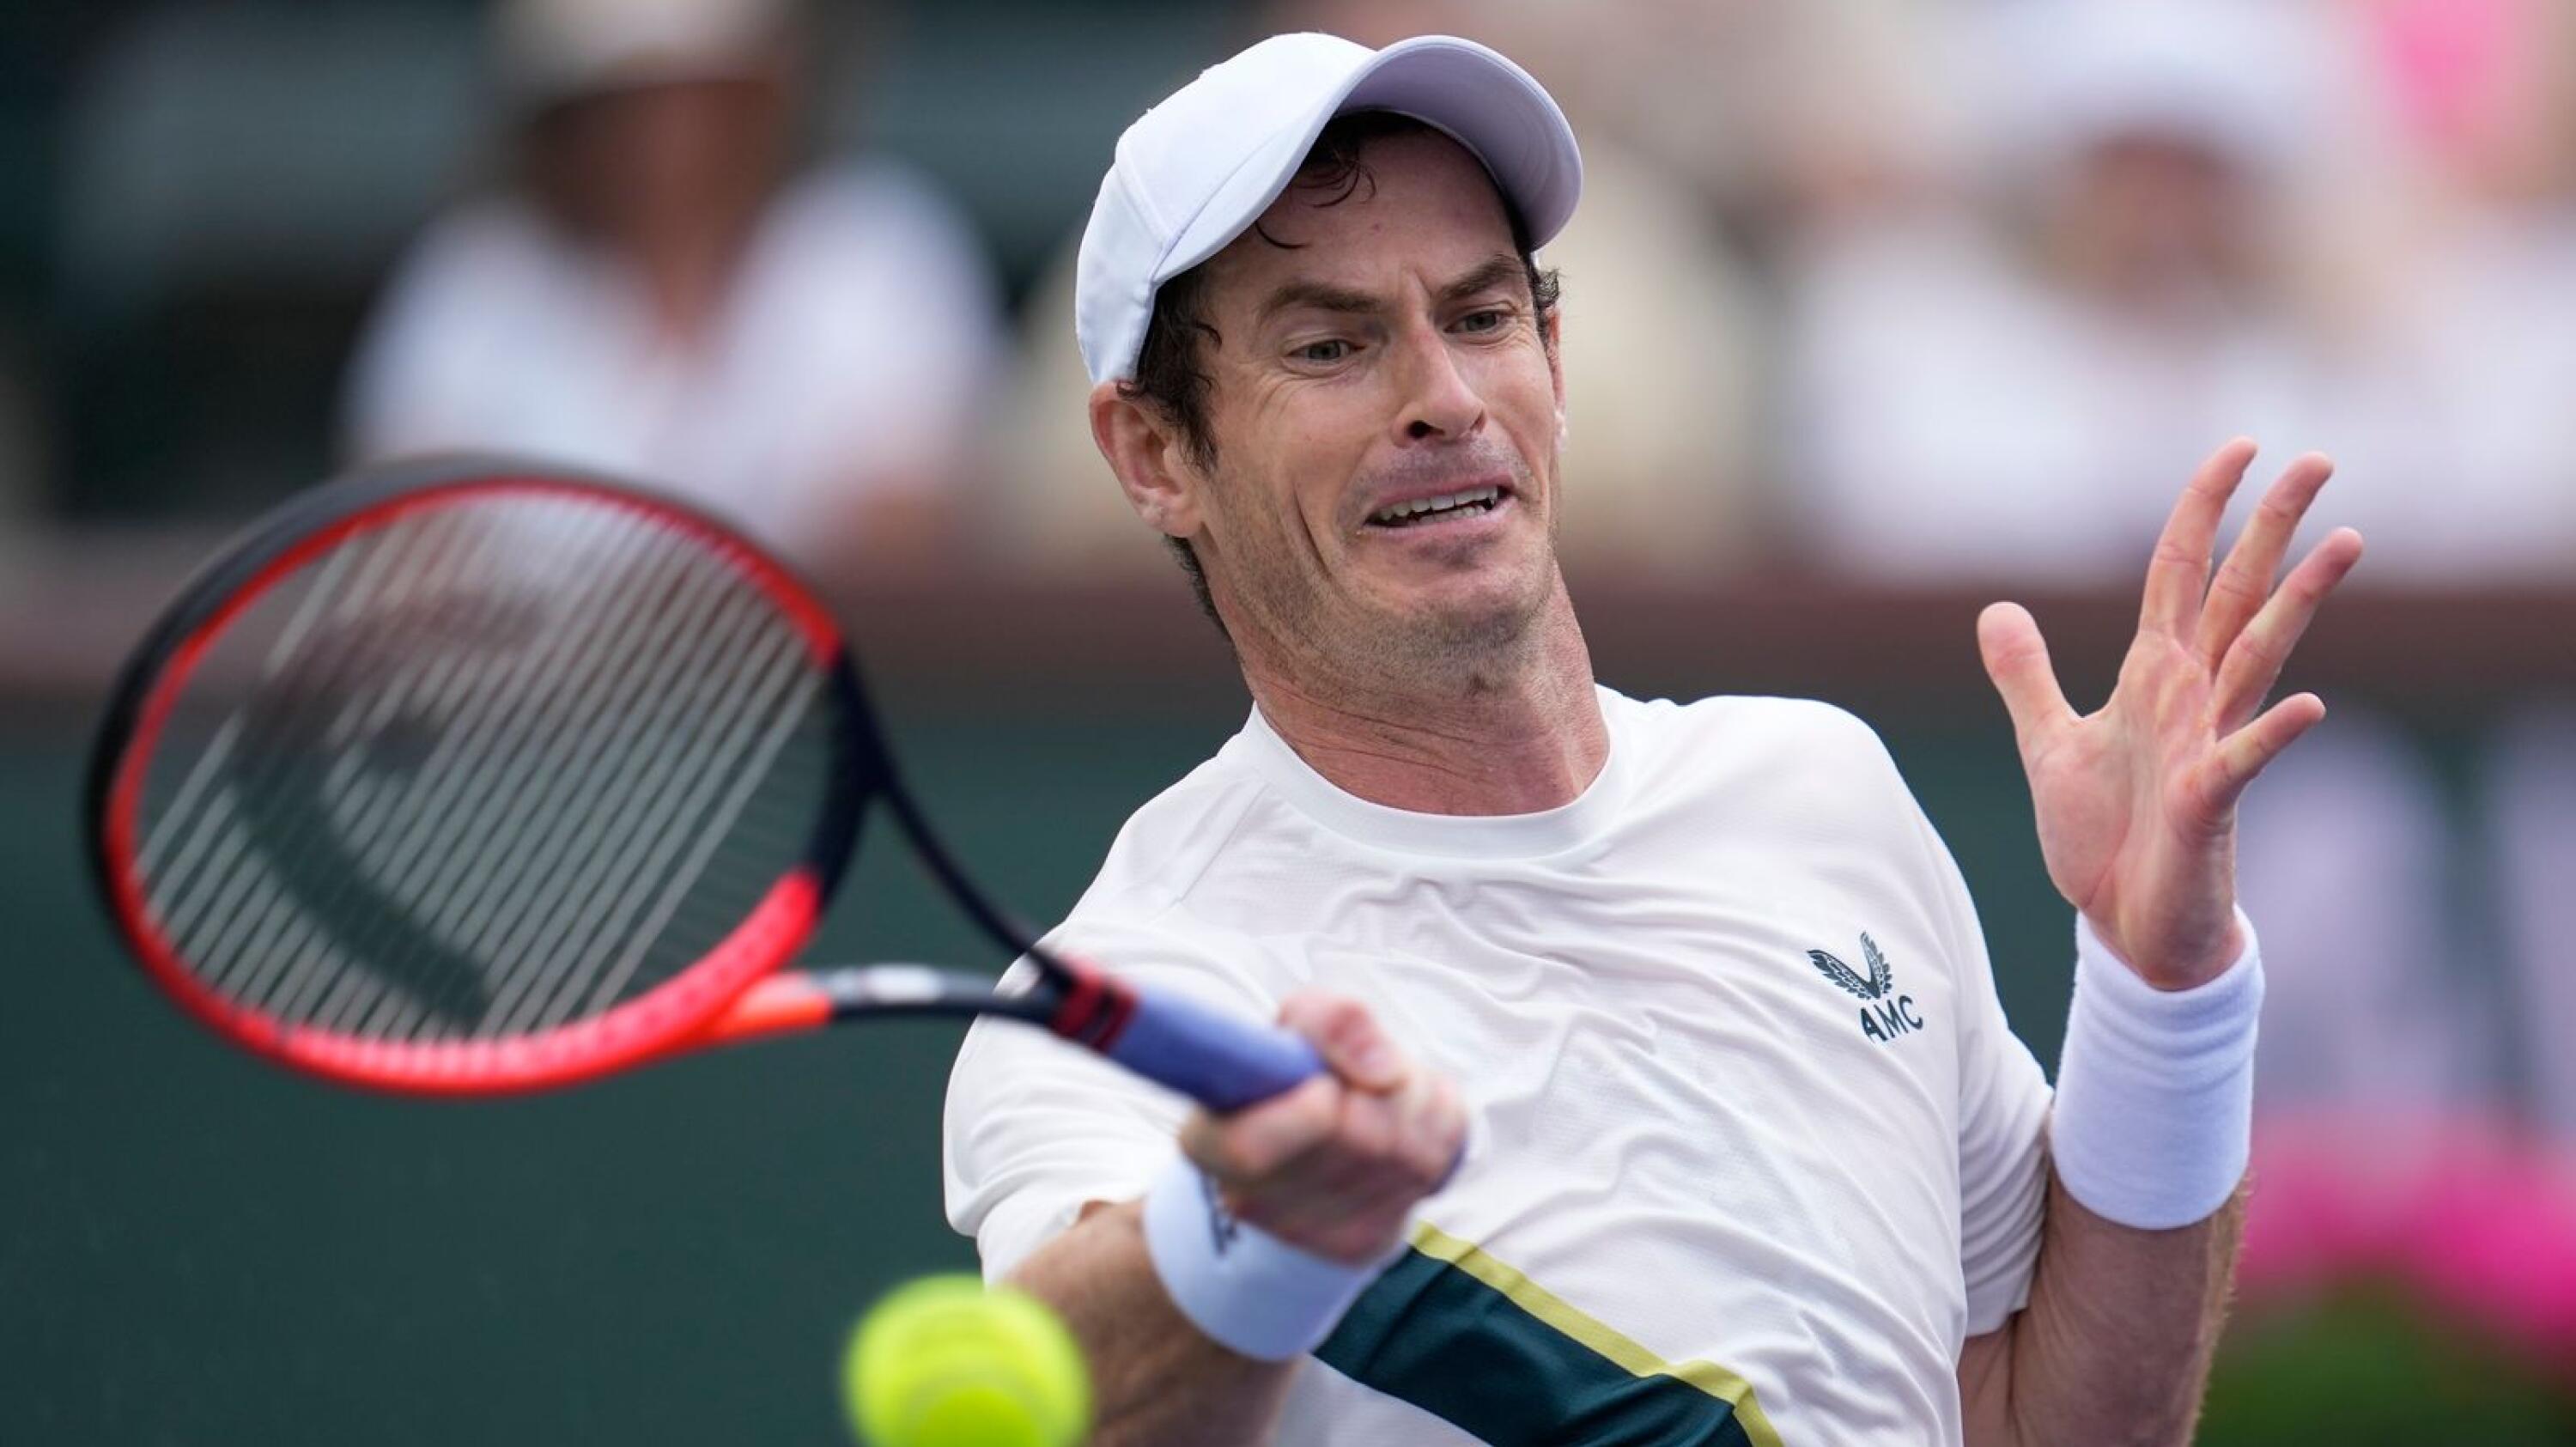 Andy Murray in action during the ng the BNP Paribas Open tennis tournament